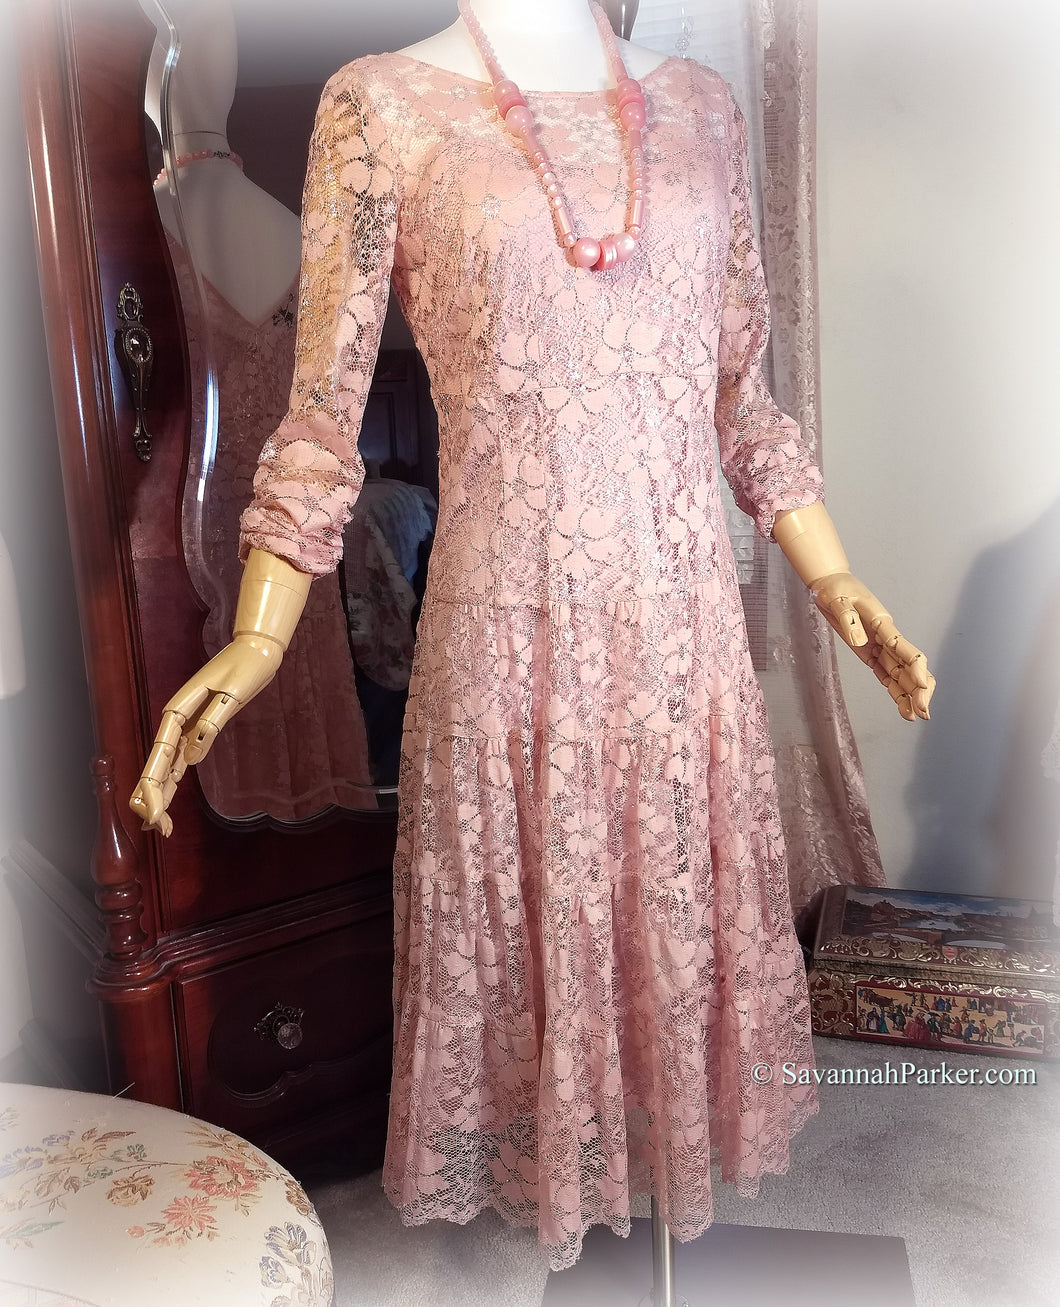 Romantic Vintage 80s-90s - Pink and Metallic Silver Victorian Lace Dance Party Tea Dress - Tiered Full Twirly Skirt - Separate Slip